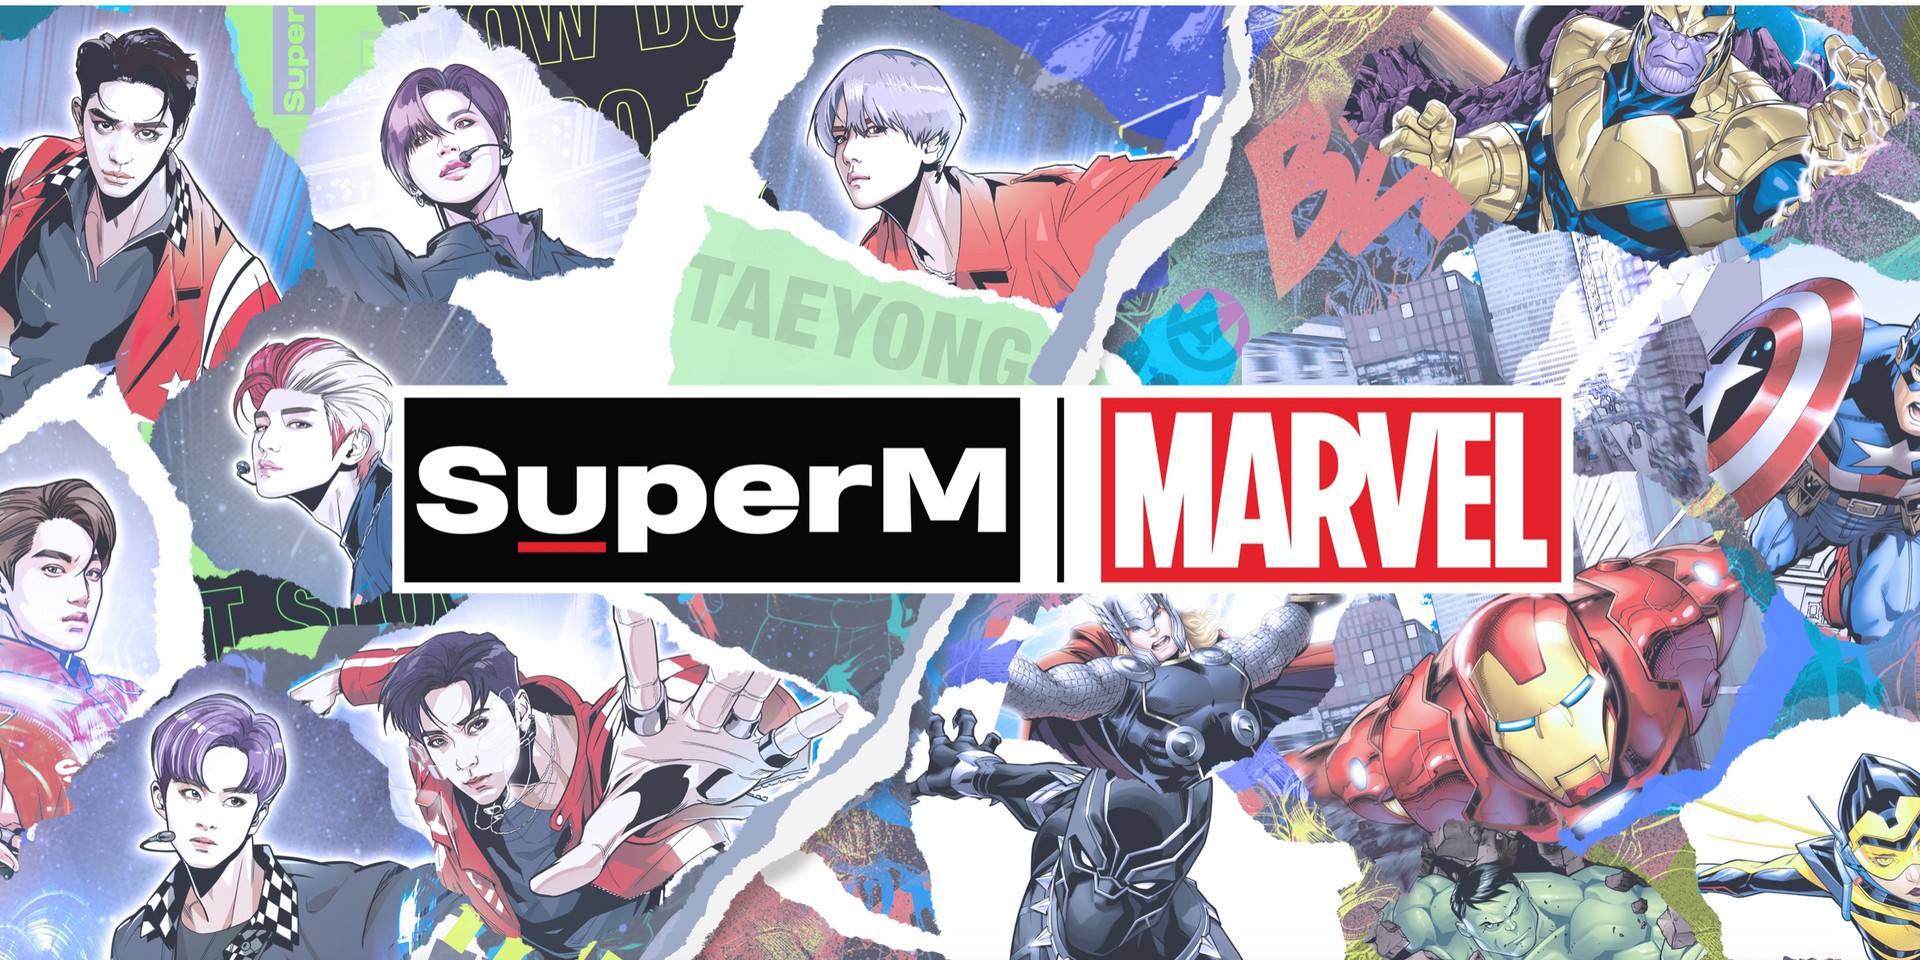 SuperM reveals Marvel collaboration, check out the limited edition merch drop